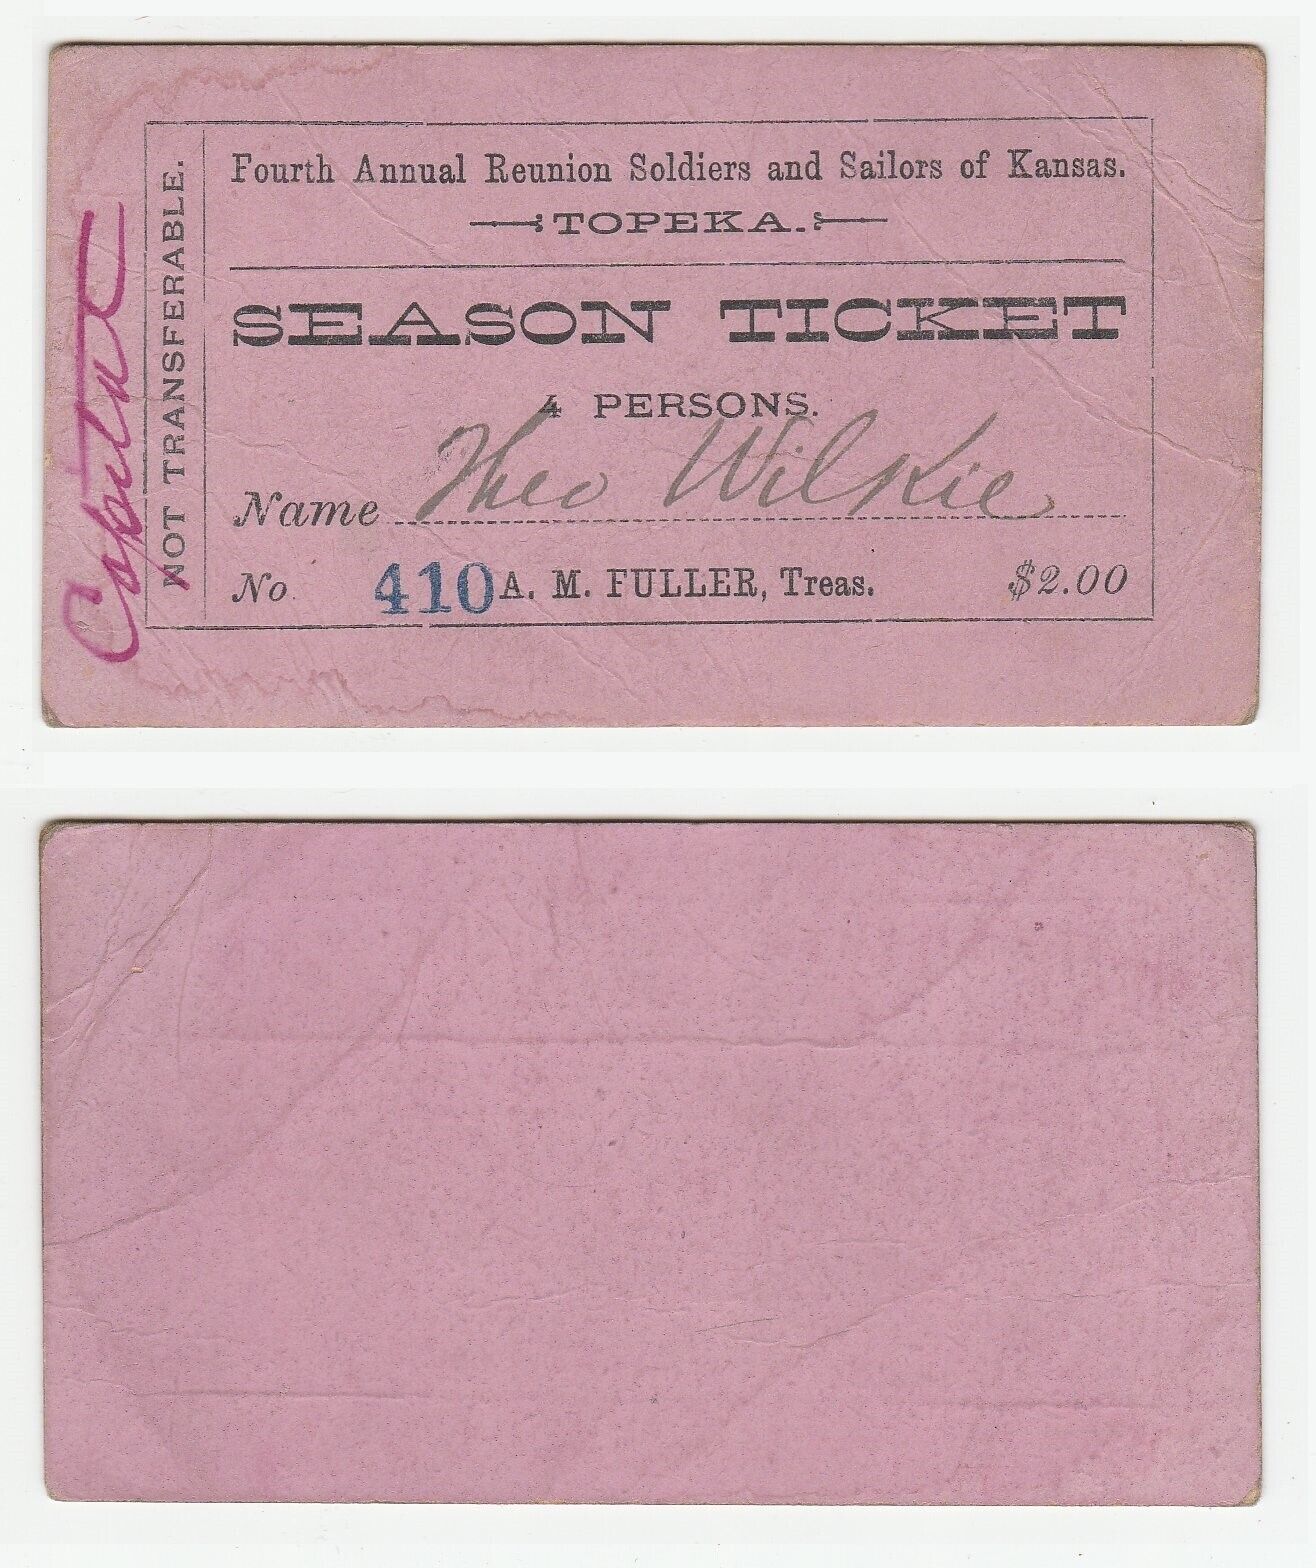 1885 Soldiers and Sailors of Kansas reunion ticket (Grand Army of the Republic)